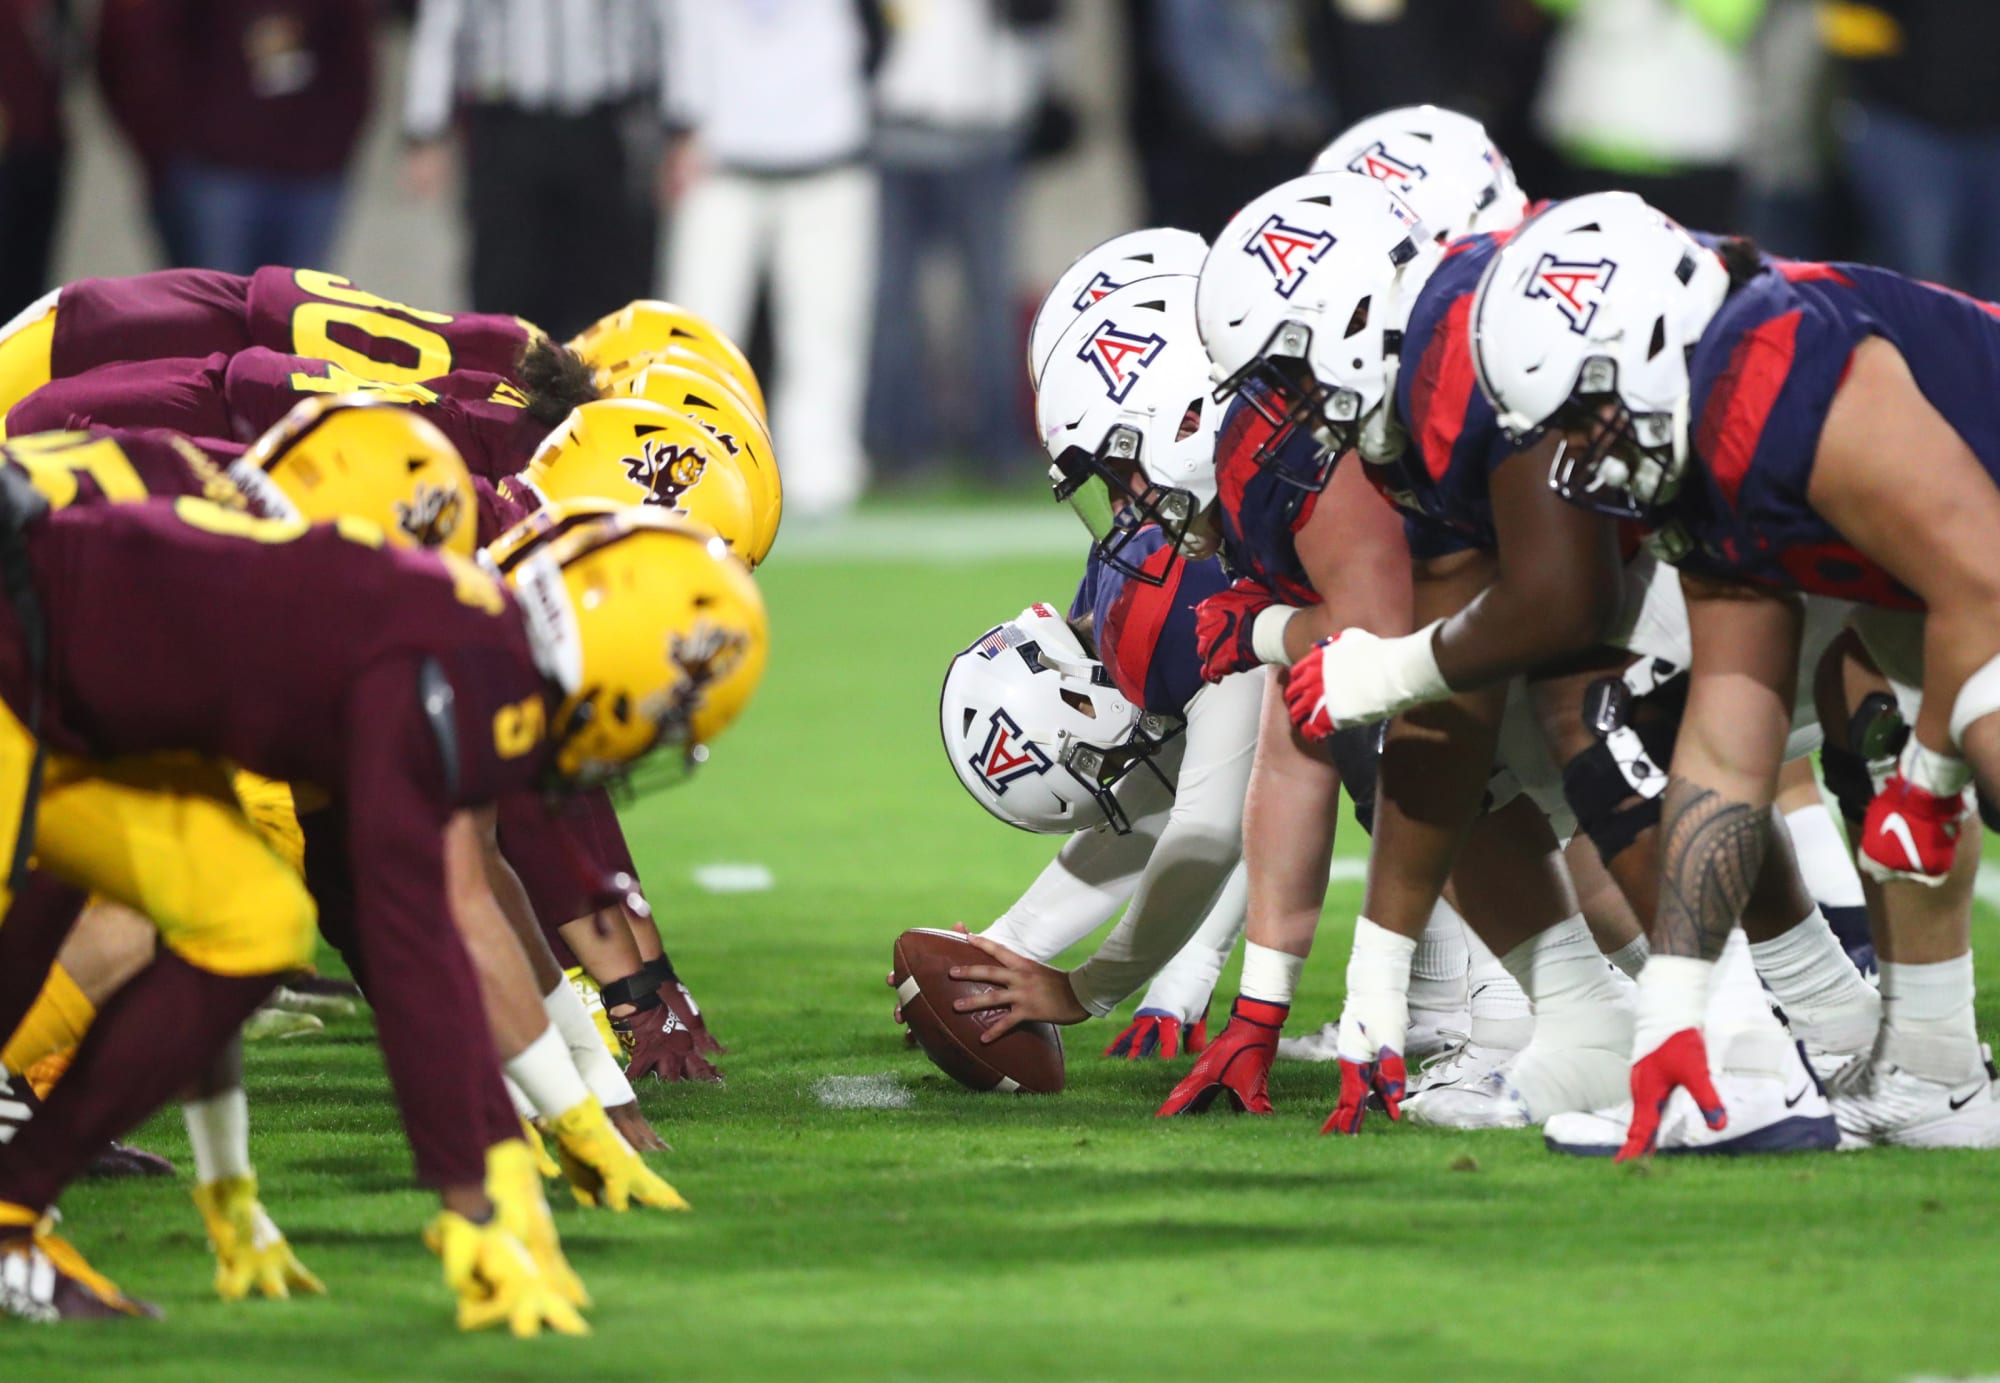 Arizona Football vs ASU, for more than just the Territorial Cup